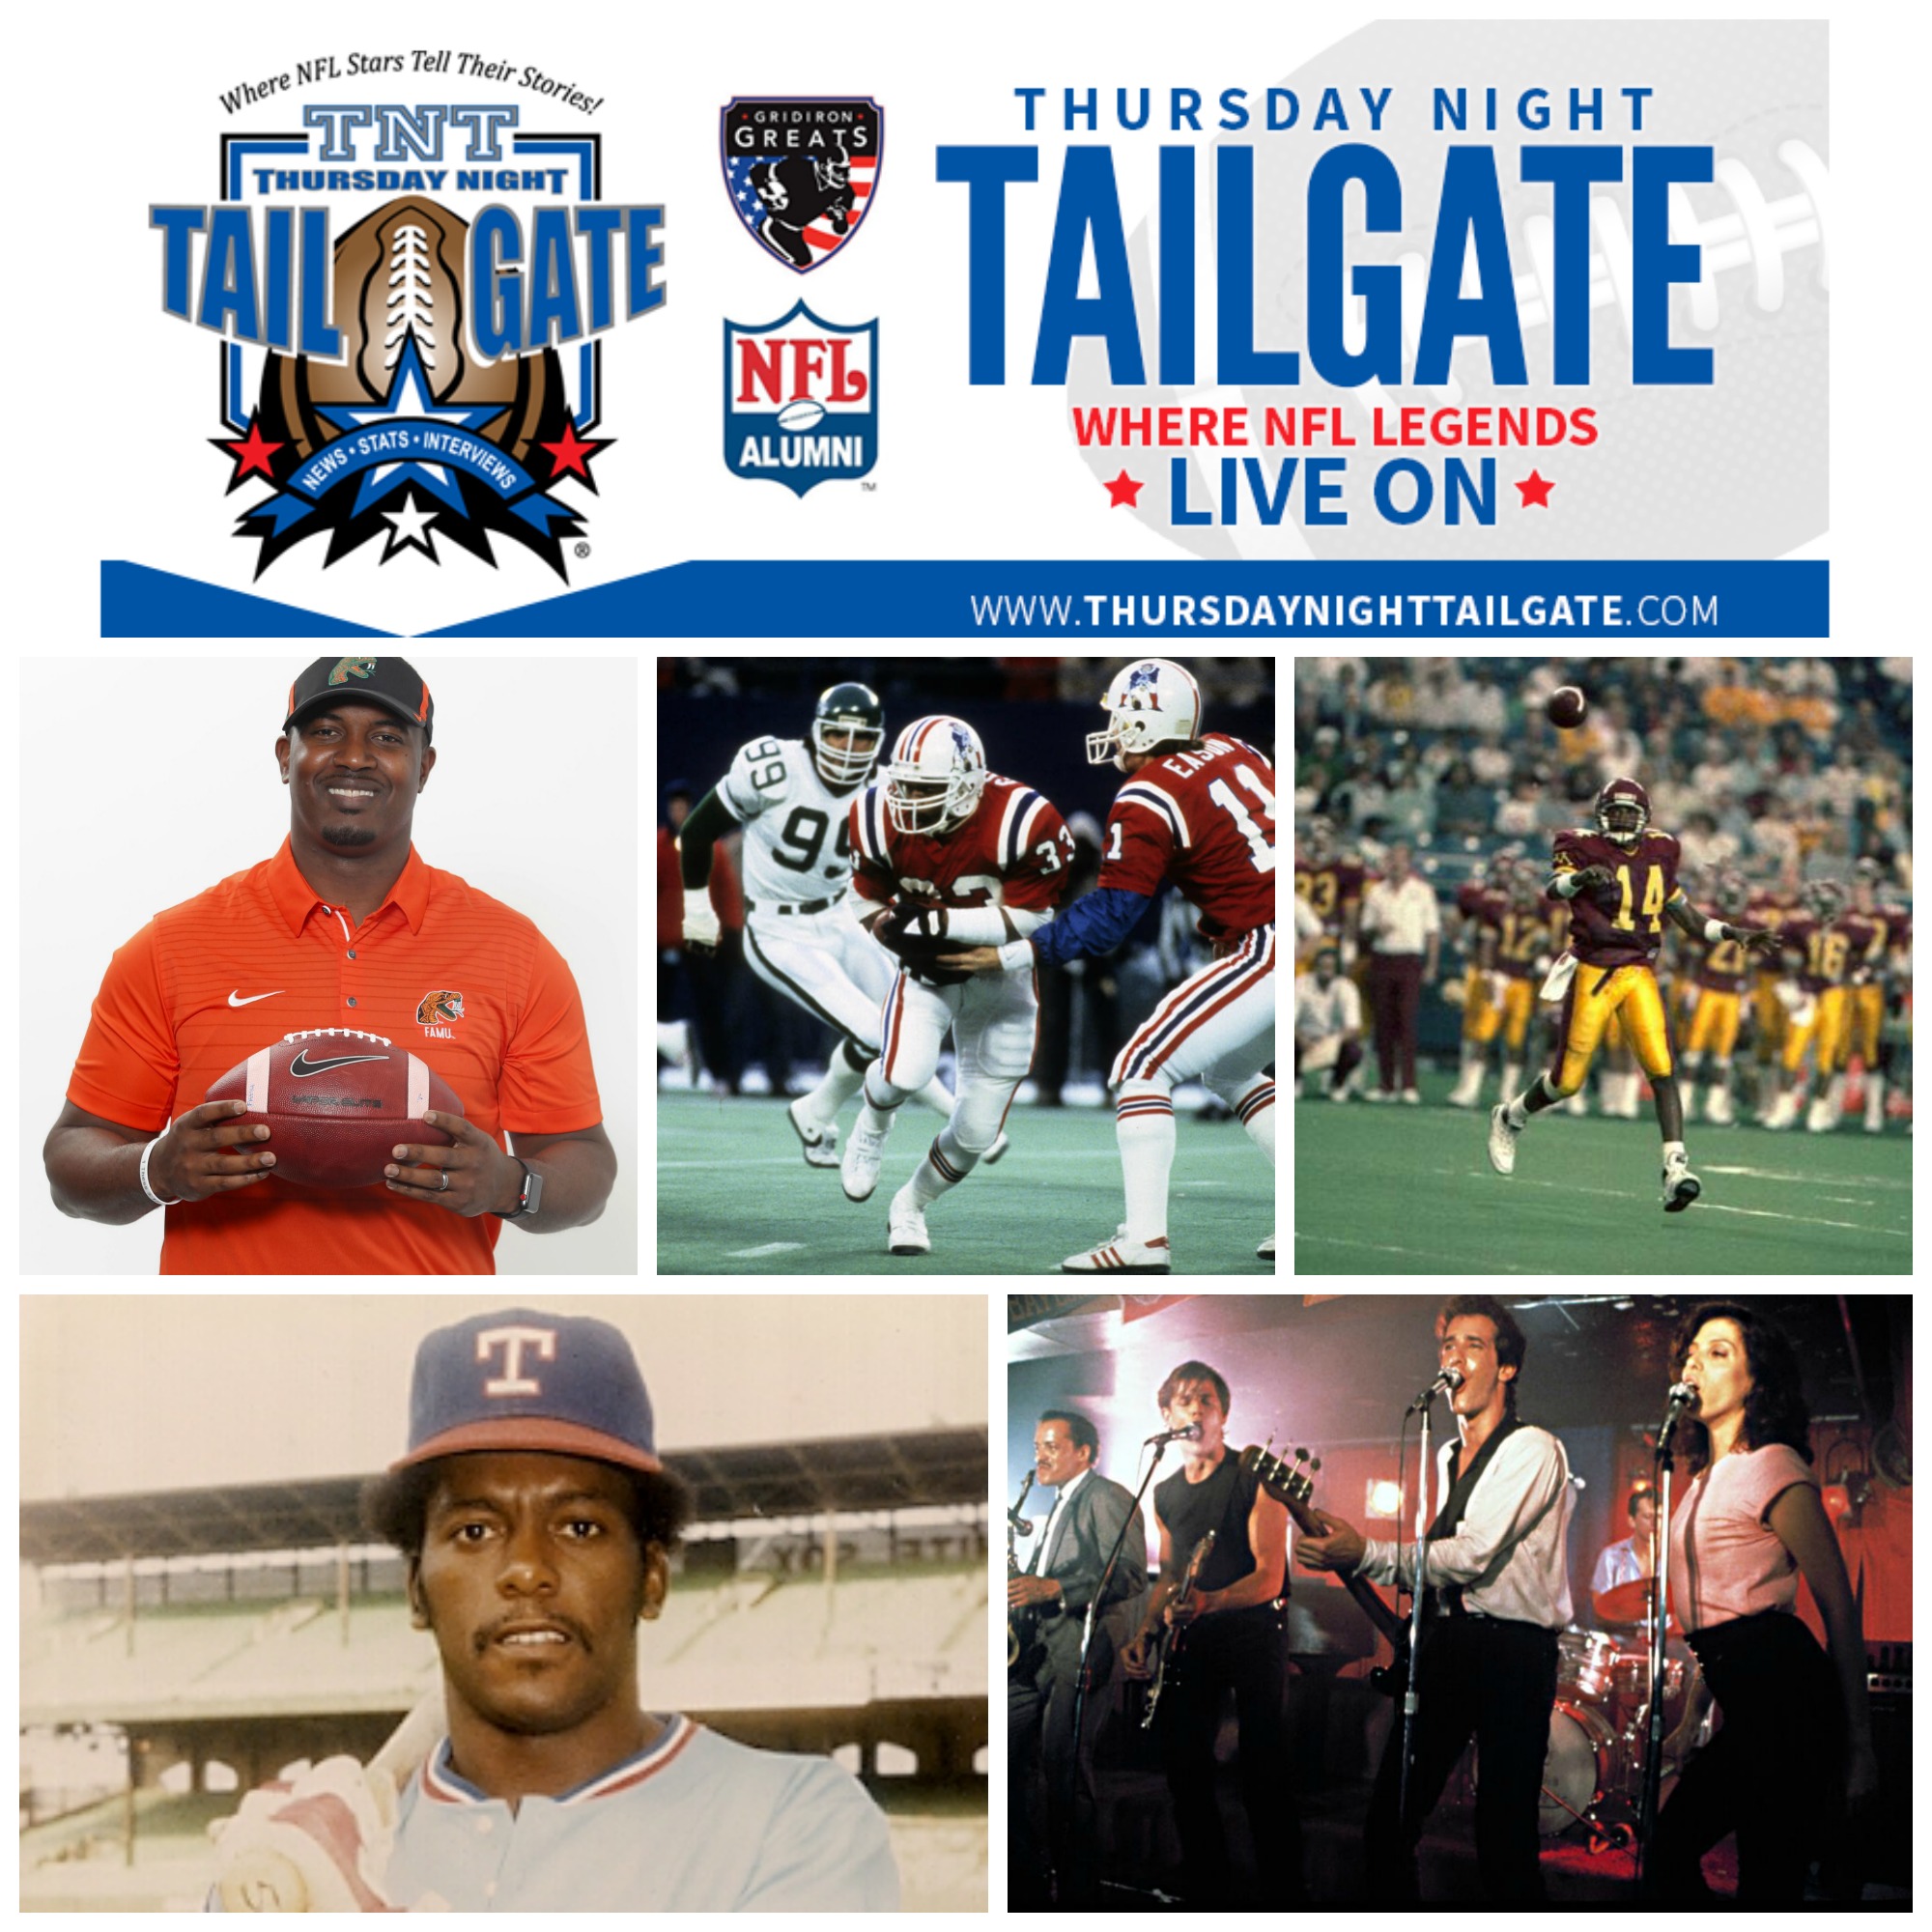 Florida A&M Head Coach Willie Simmon, former Patriots RB Tony Collins, former University of Minnesota QB Rickey Foggie, former Rangers OF Billy Sample & Coach Matthew Laurance Join Us